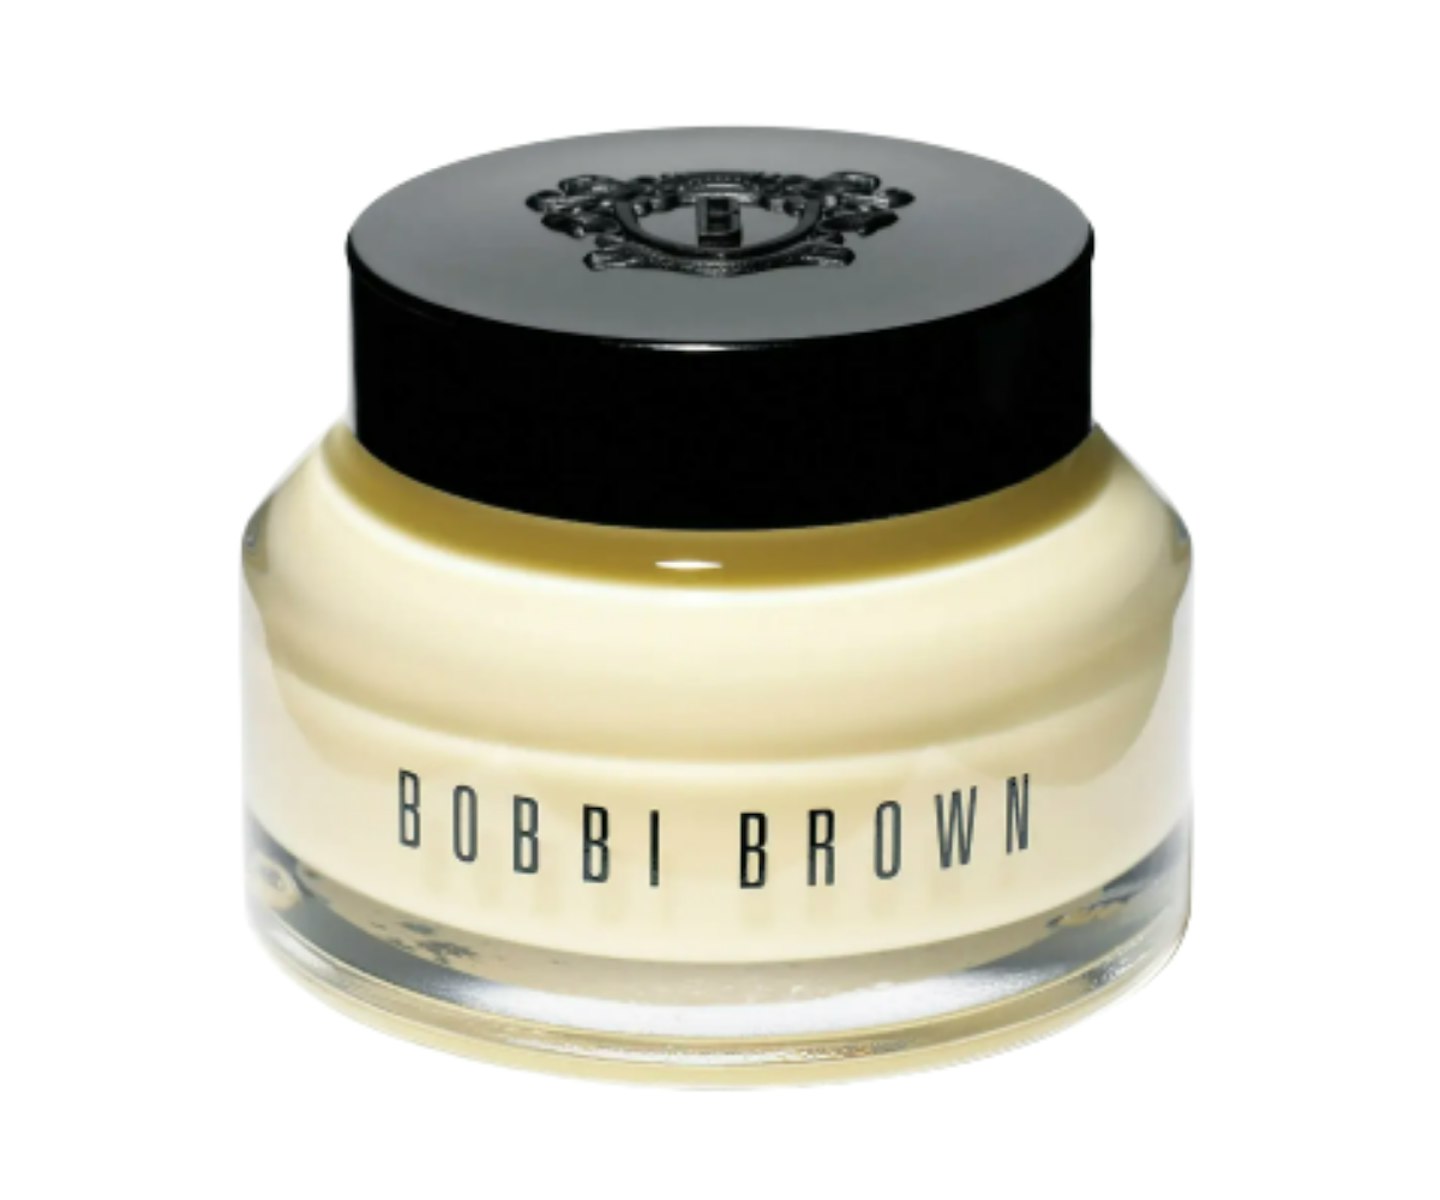 A picture of the Bobbi Brown Vitamin Enriched Face Base